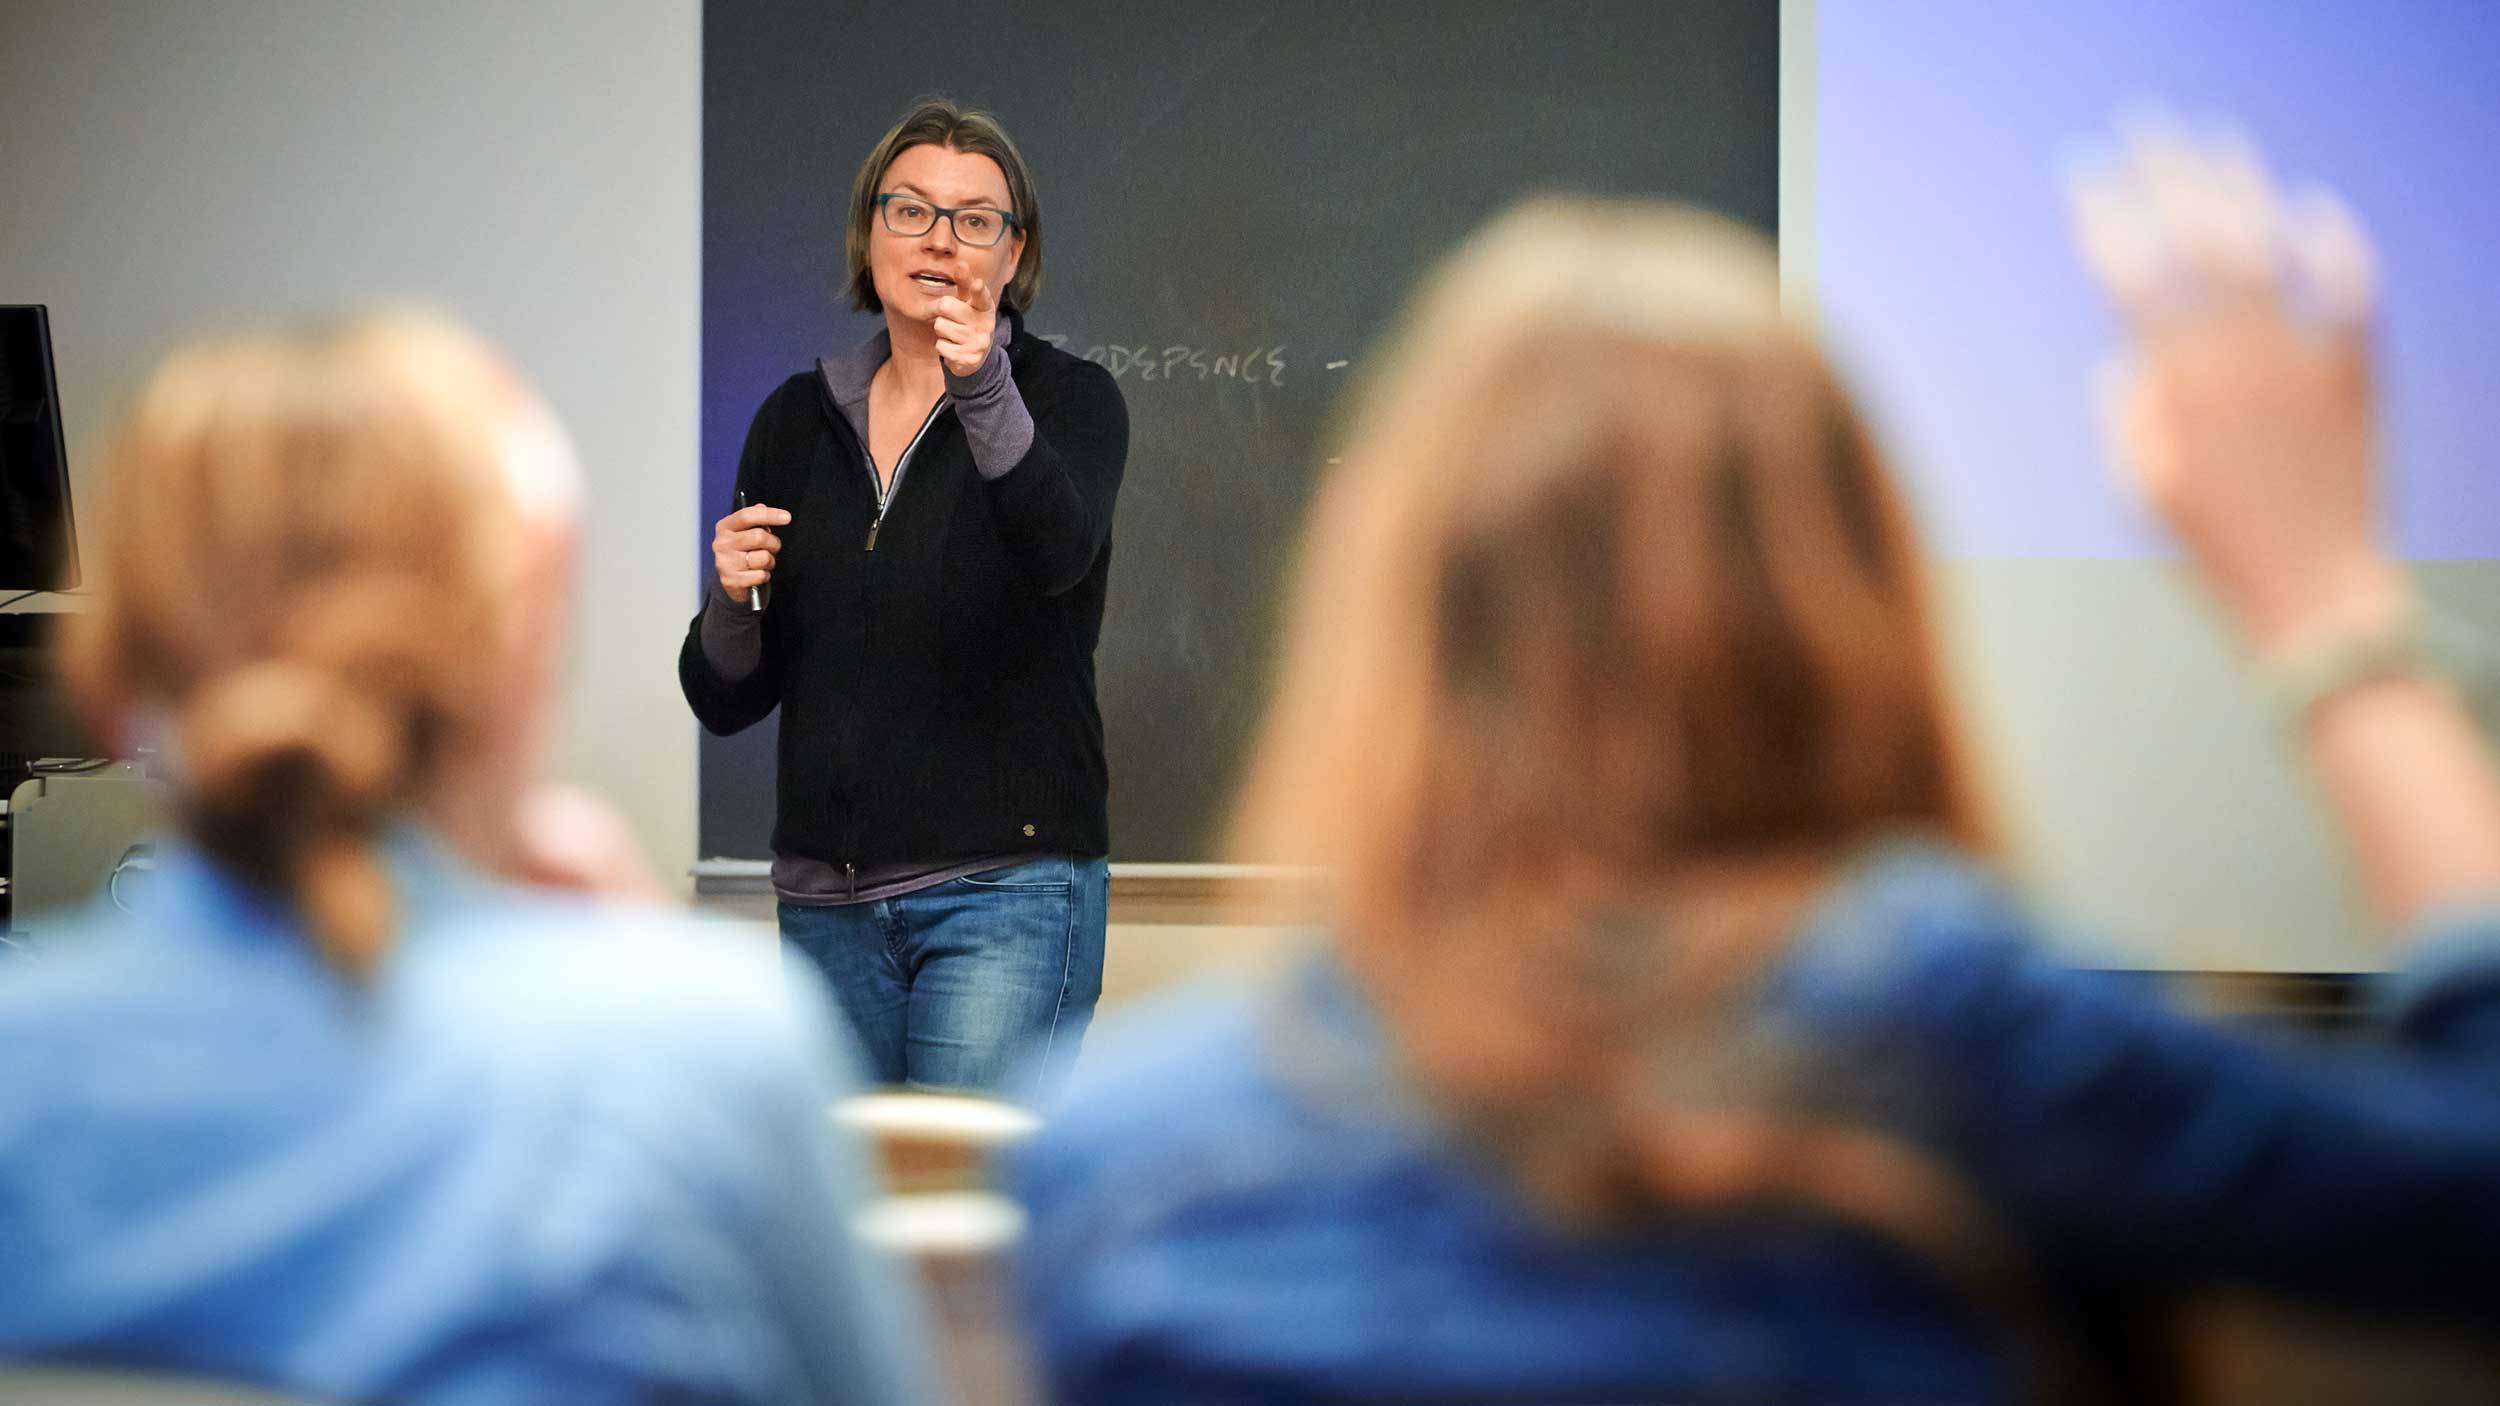 Prof. Susan Thomson speaks to students in a classroom